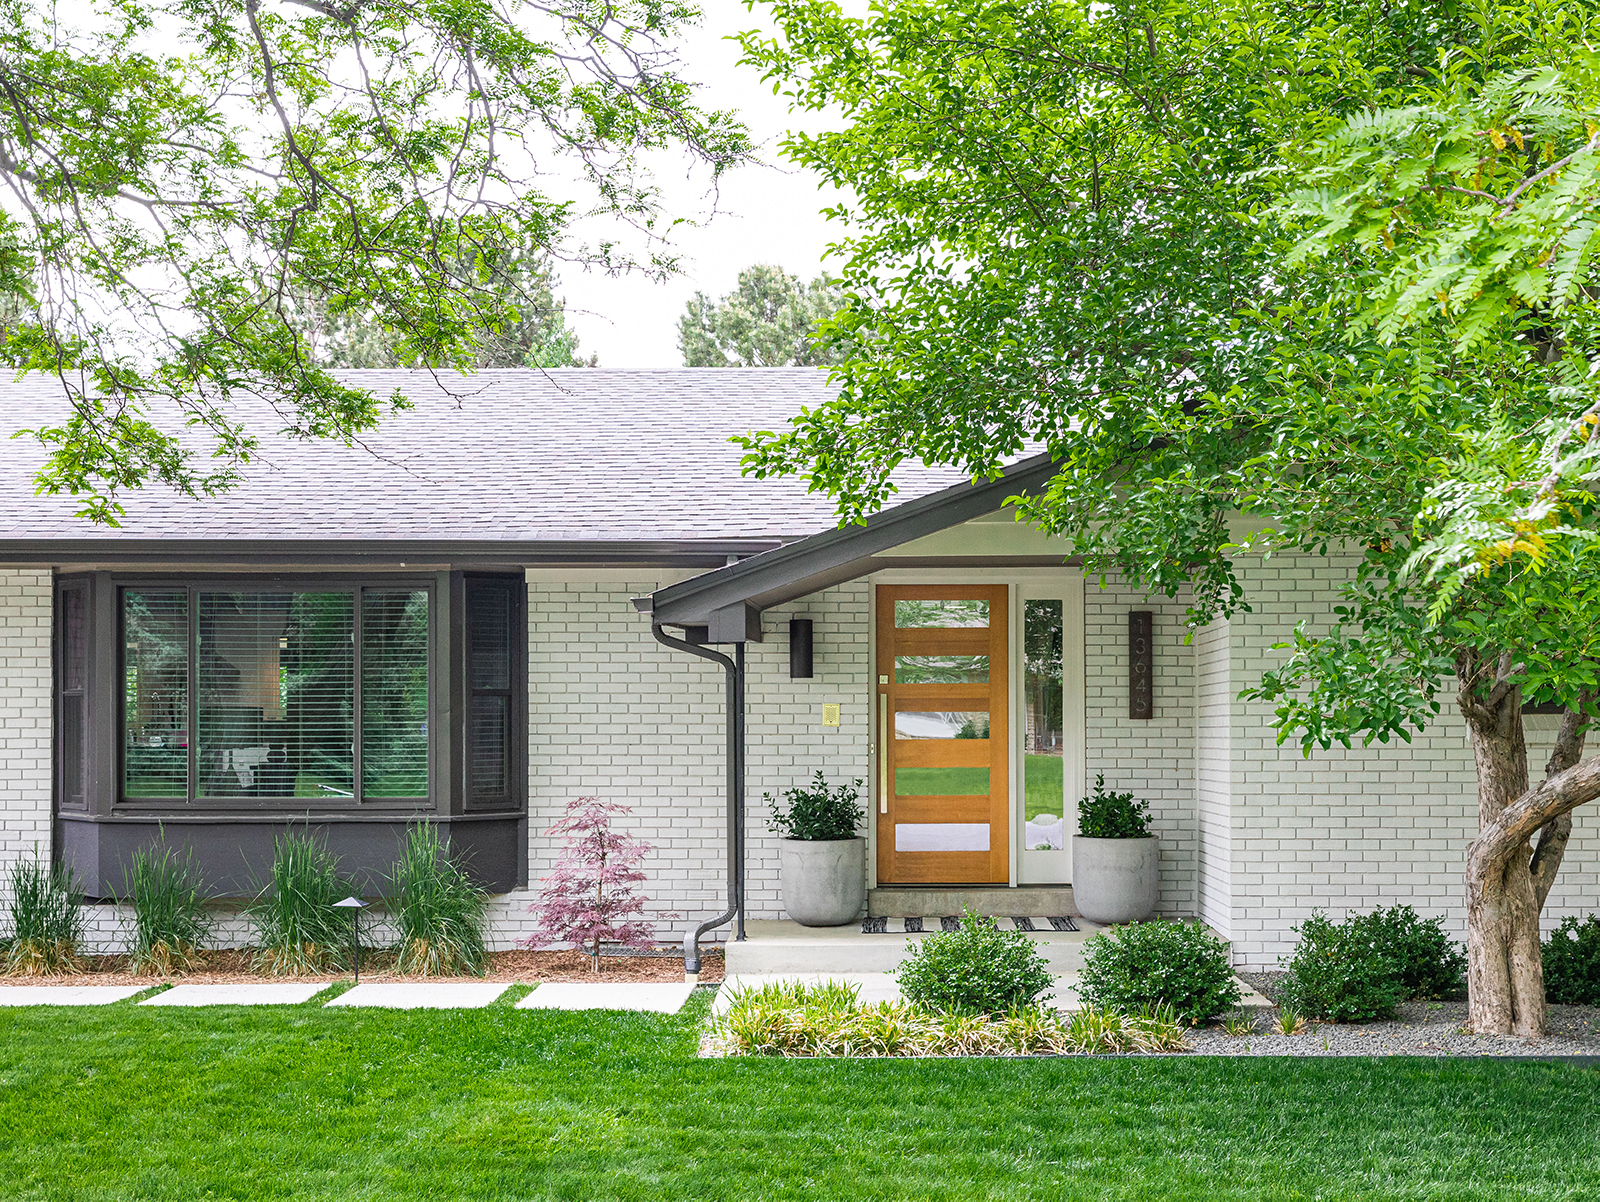 How To Make Your Home’s Exterior Appealing